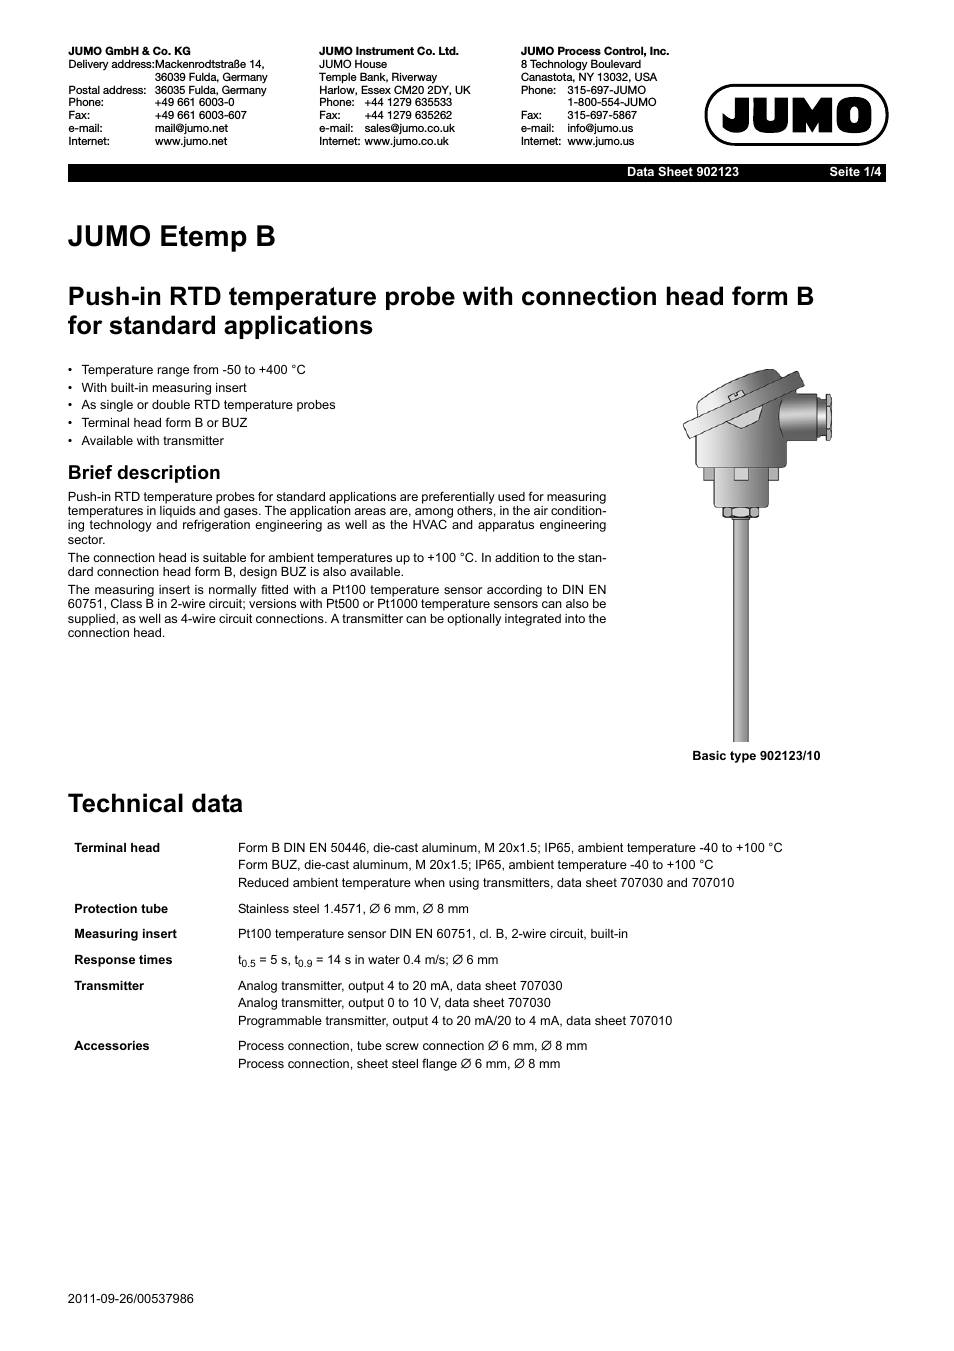 902123 Etemp B Push-In RTD Temperature Probe with Terminal Head Form B for Standard Applications Data Sheet